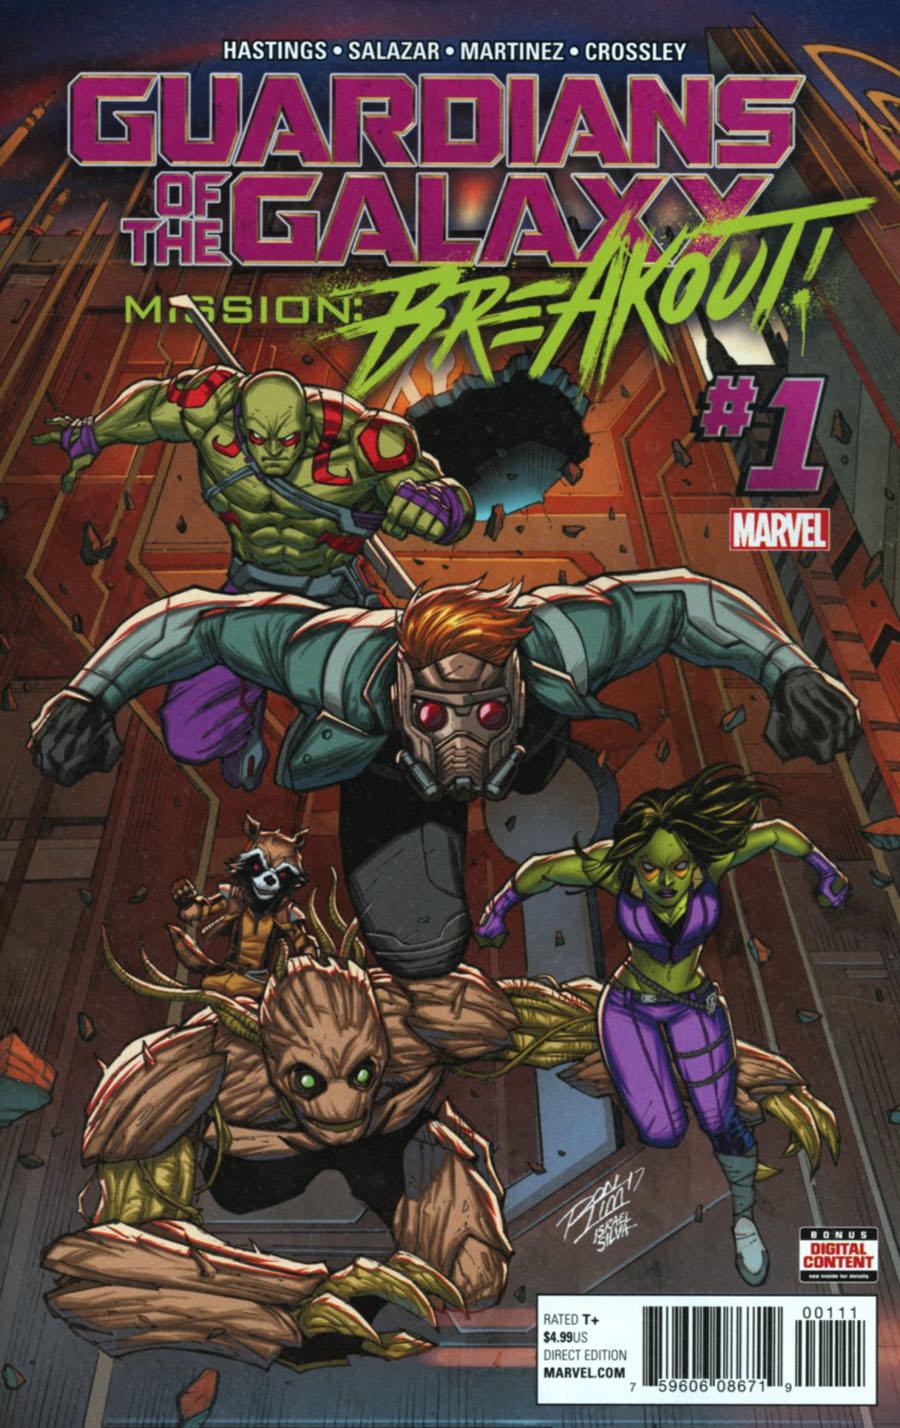 Guardians Of The Galaxy Mission Breakout Vol. 1 #1